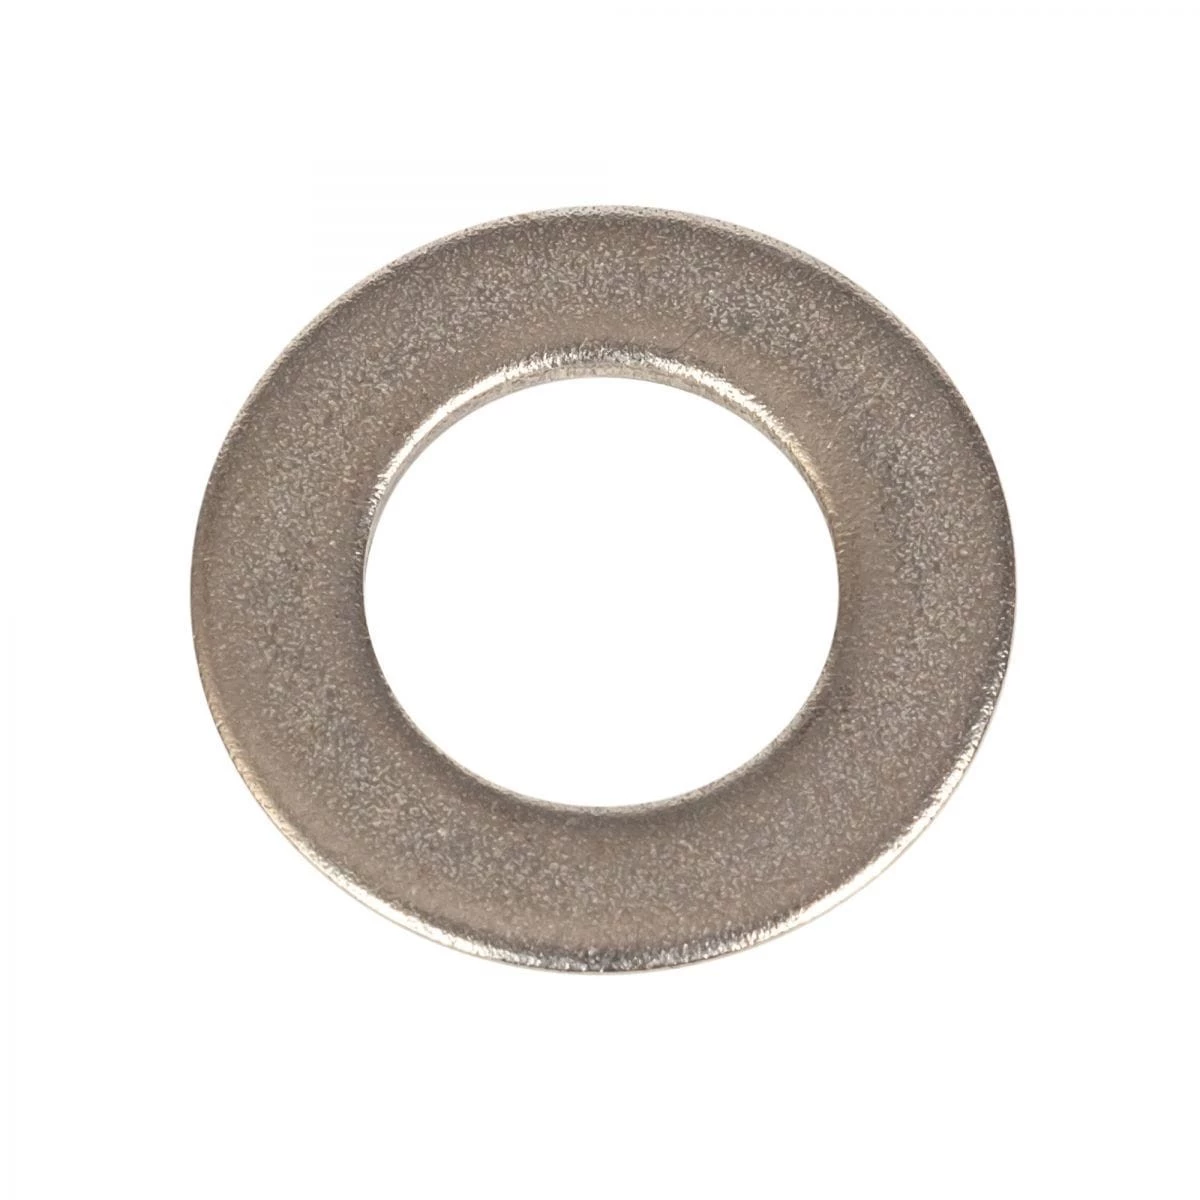 Stainless Steel SS 316 Flat Washer, ASTM F436, 7/8 Inch